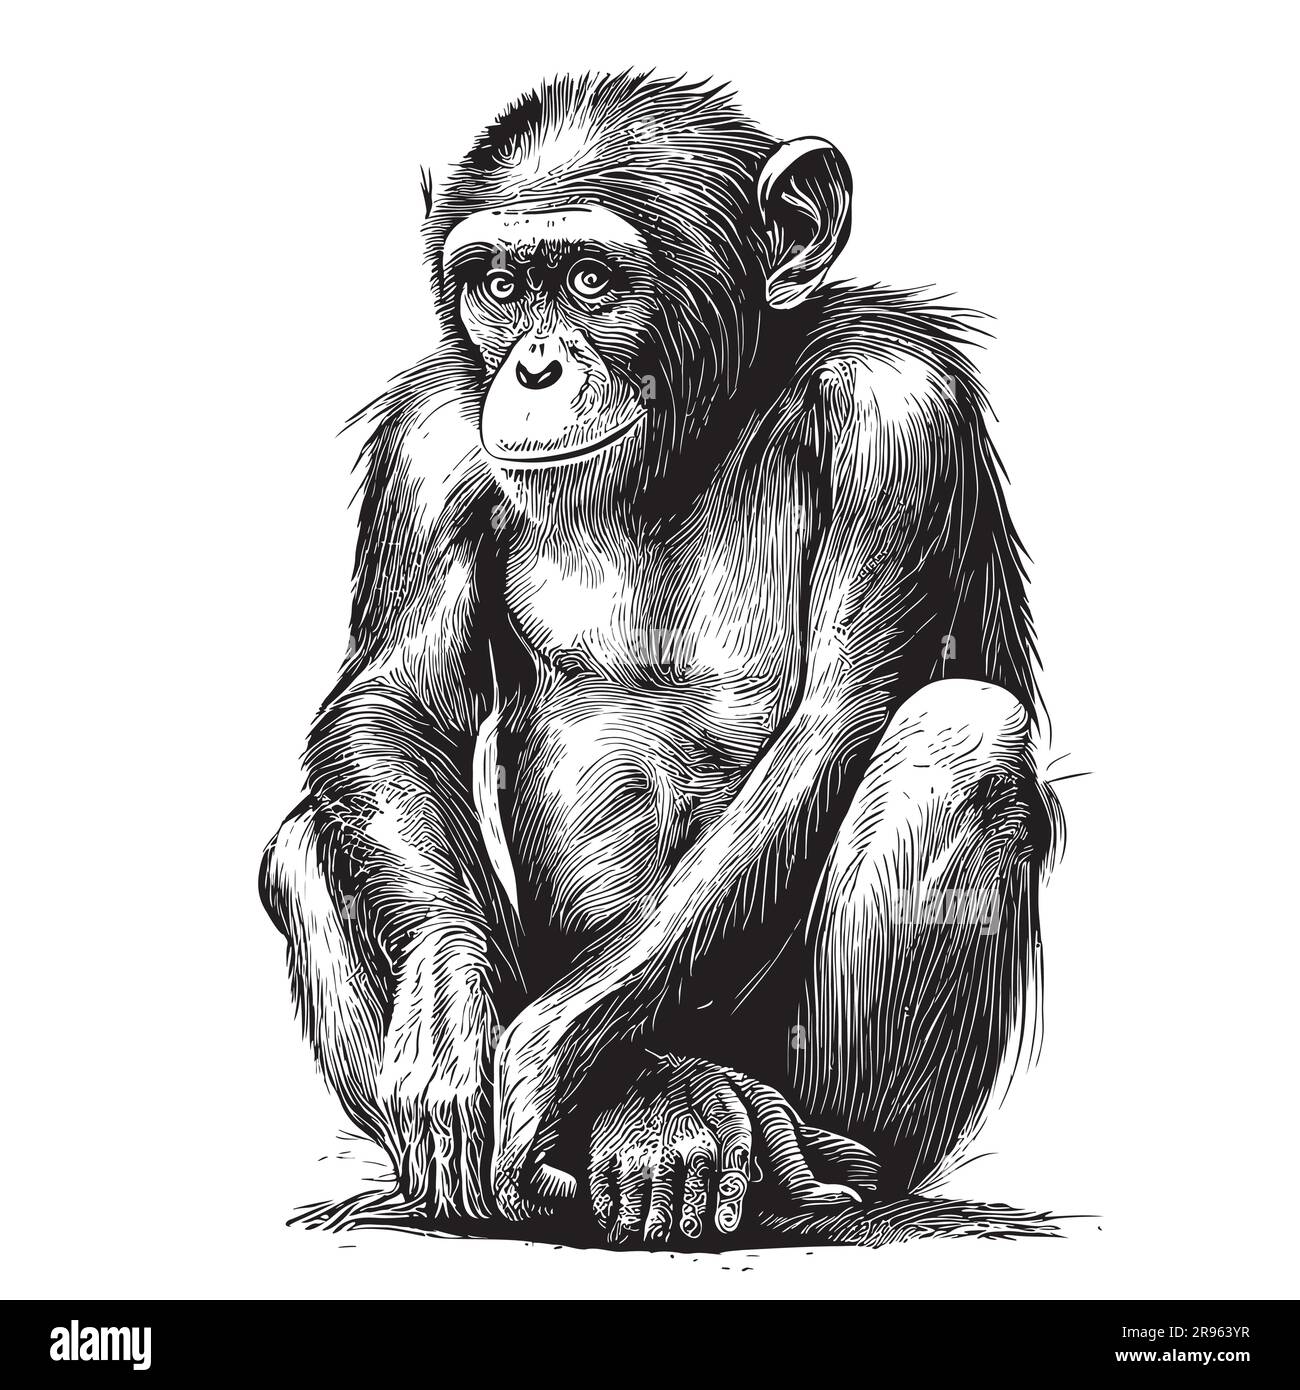 Monkey sitting sketch hand drawn in doodle style illustration Stock Vector